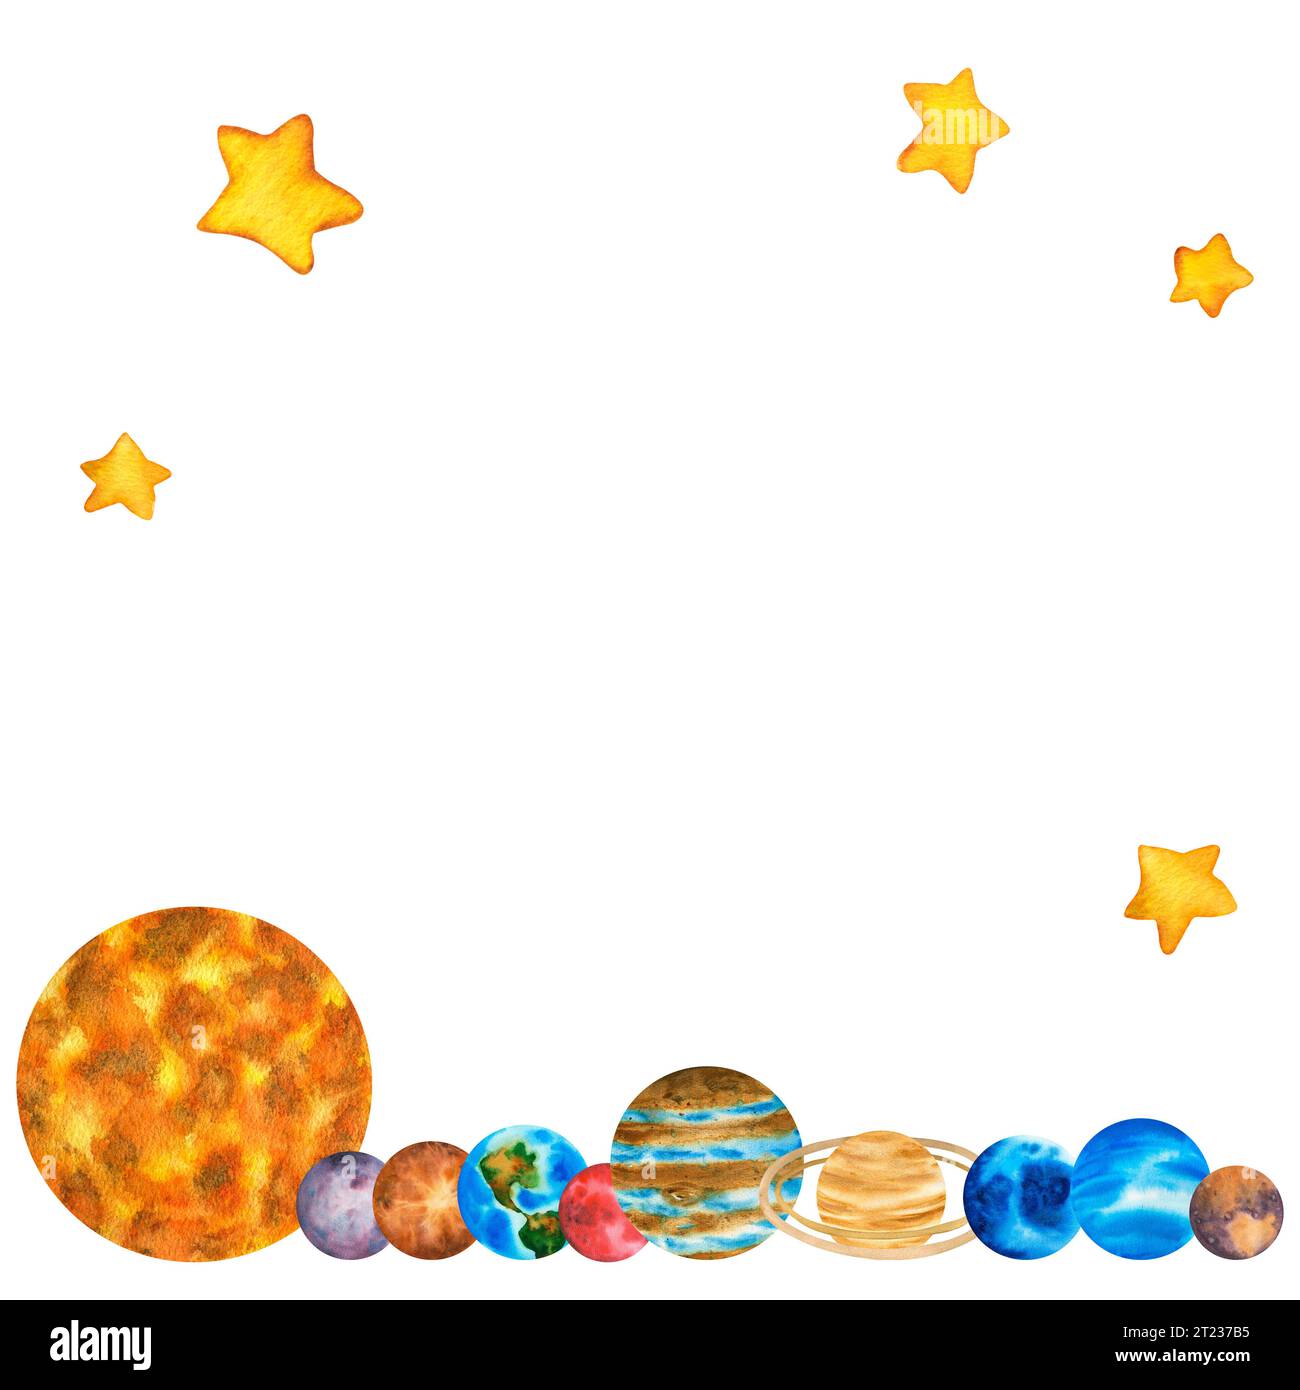 Frame. Planets of the solar system. Border. Illustration on background of outer space with stars. Planetarium clip art. Stock Photo